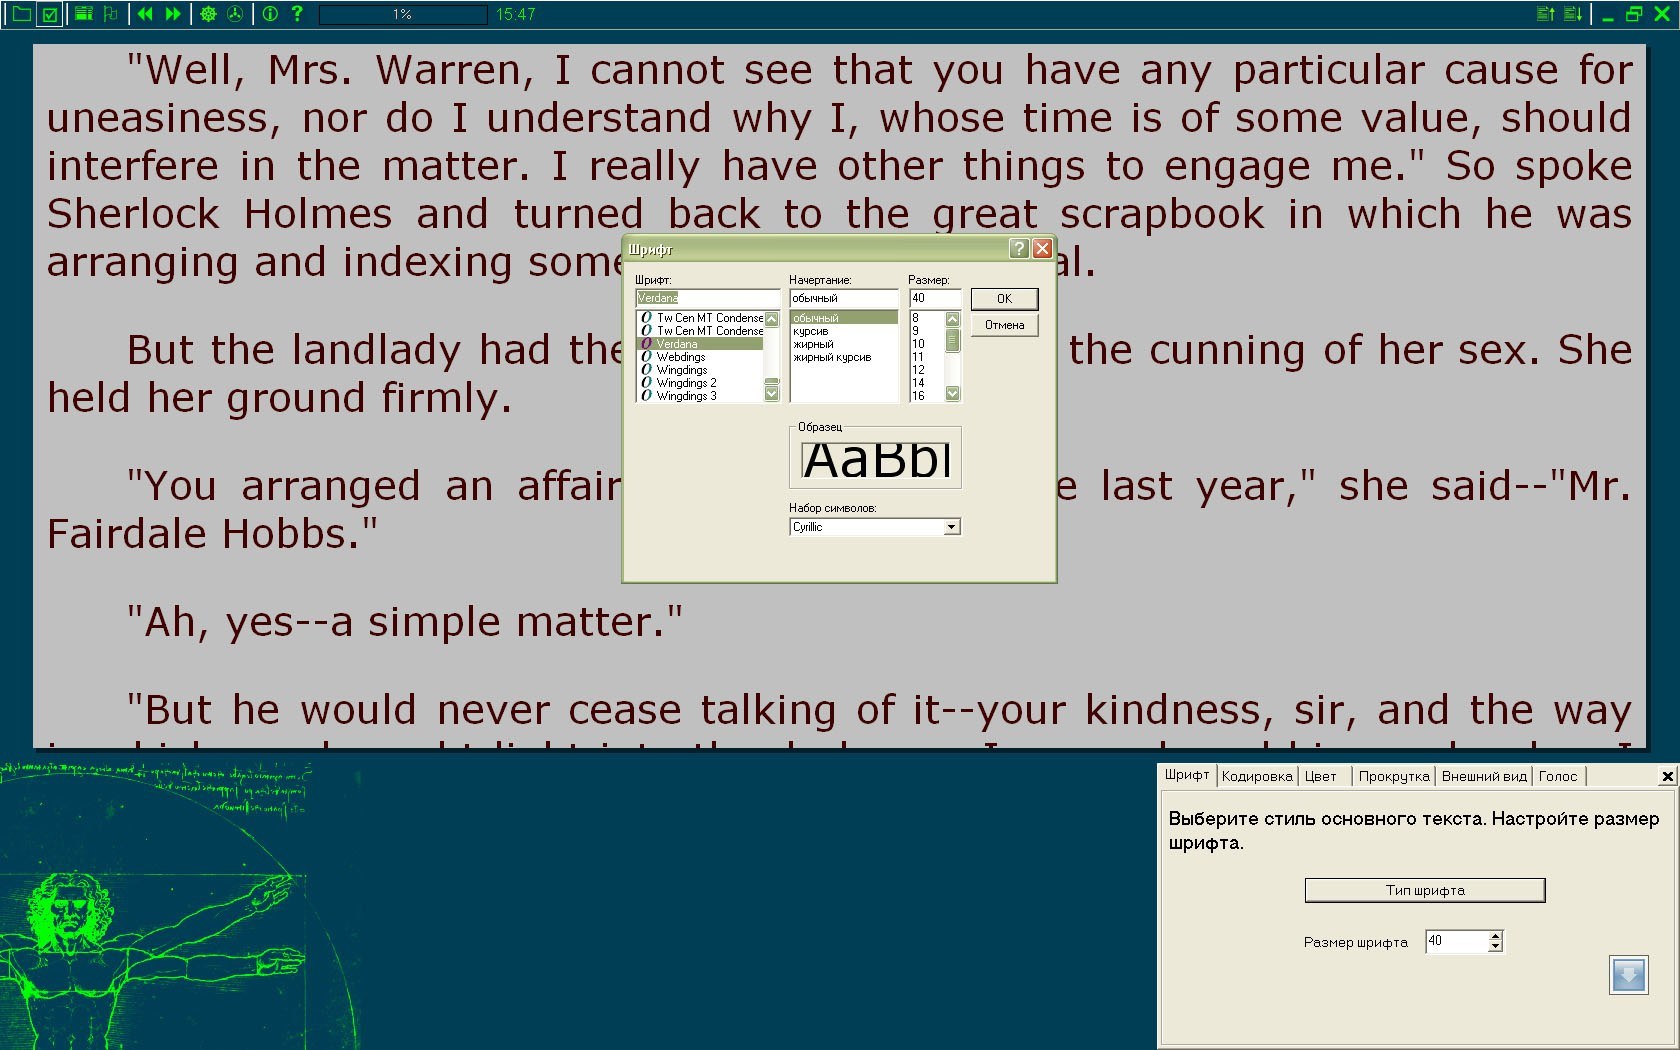 BookReader 4.6 : Interface with options window